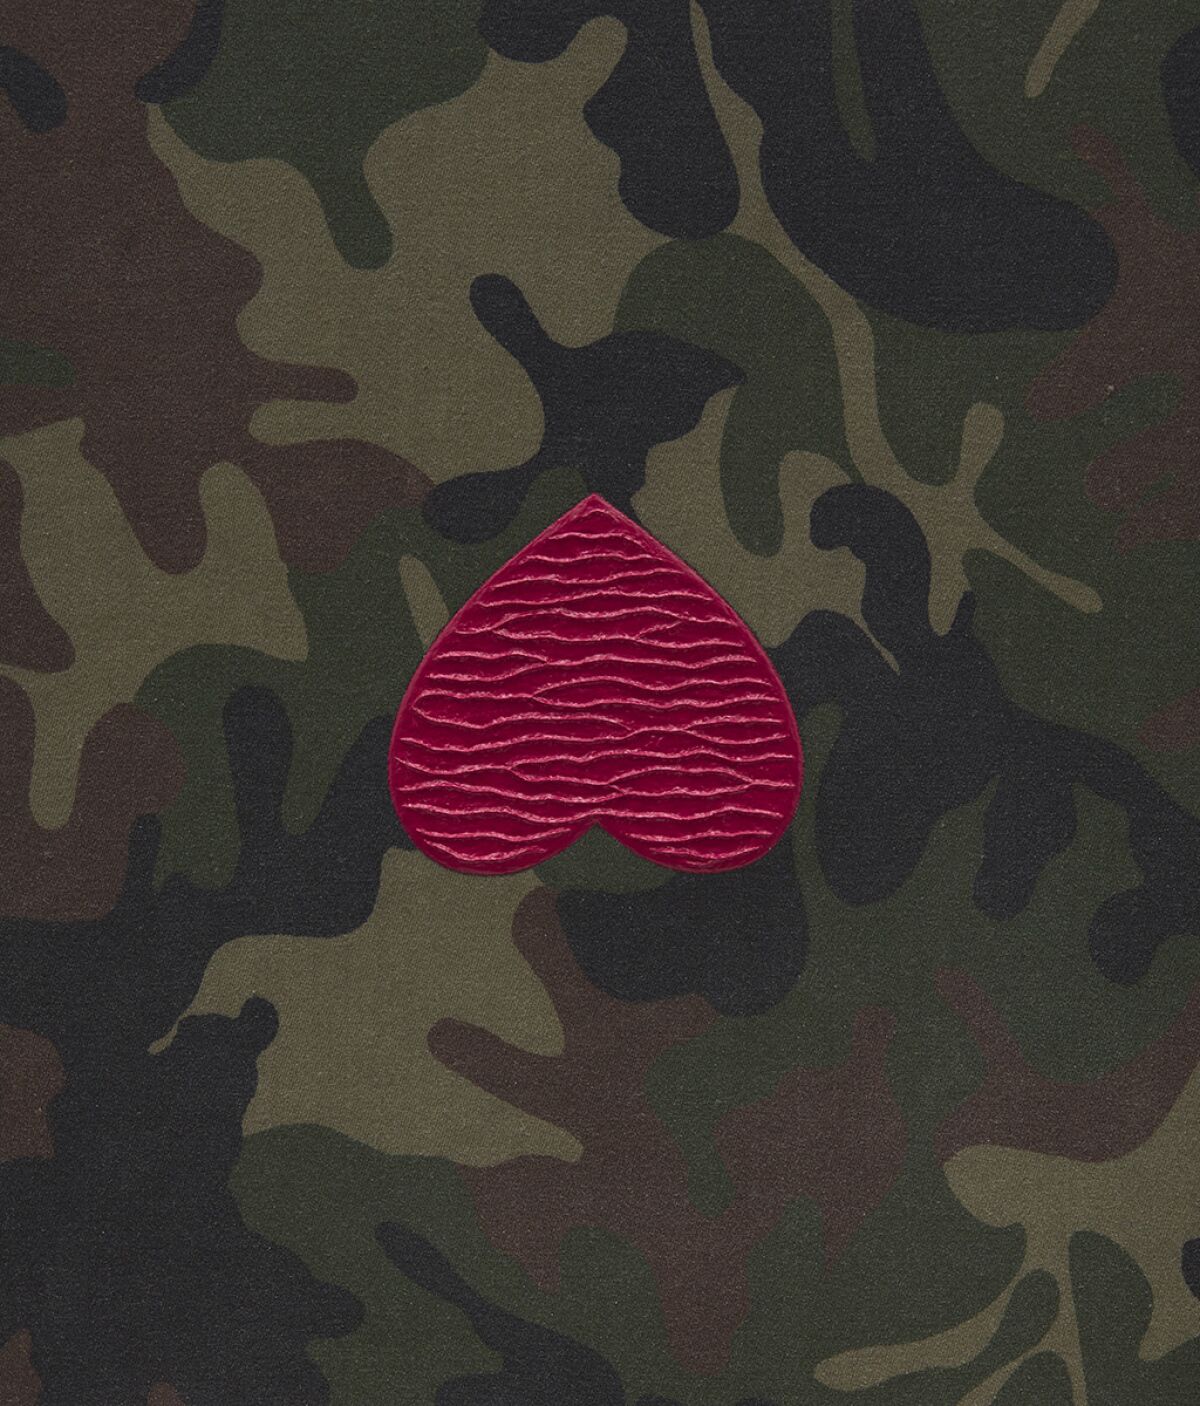 A painting on camouflage in shades of green shows a glittering, upside-down red heart at its middle